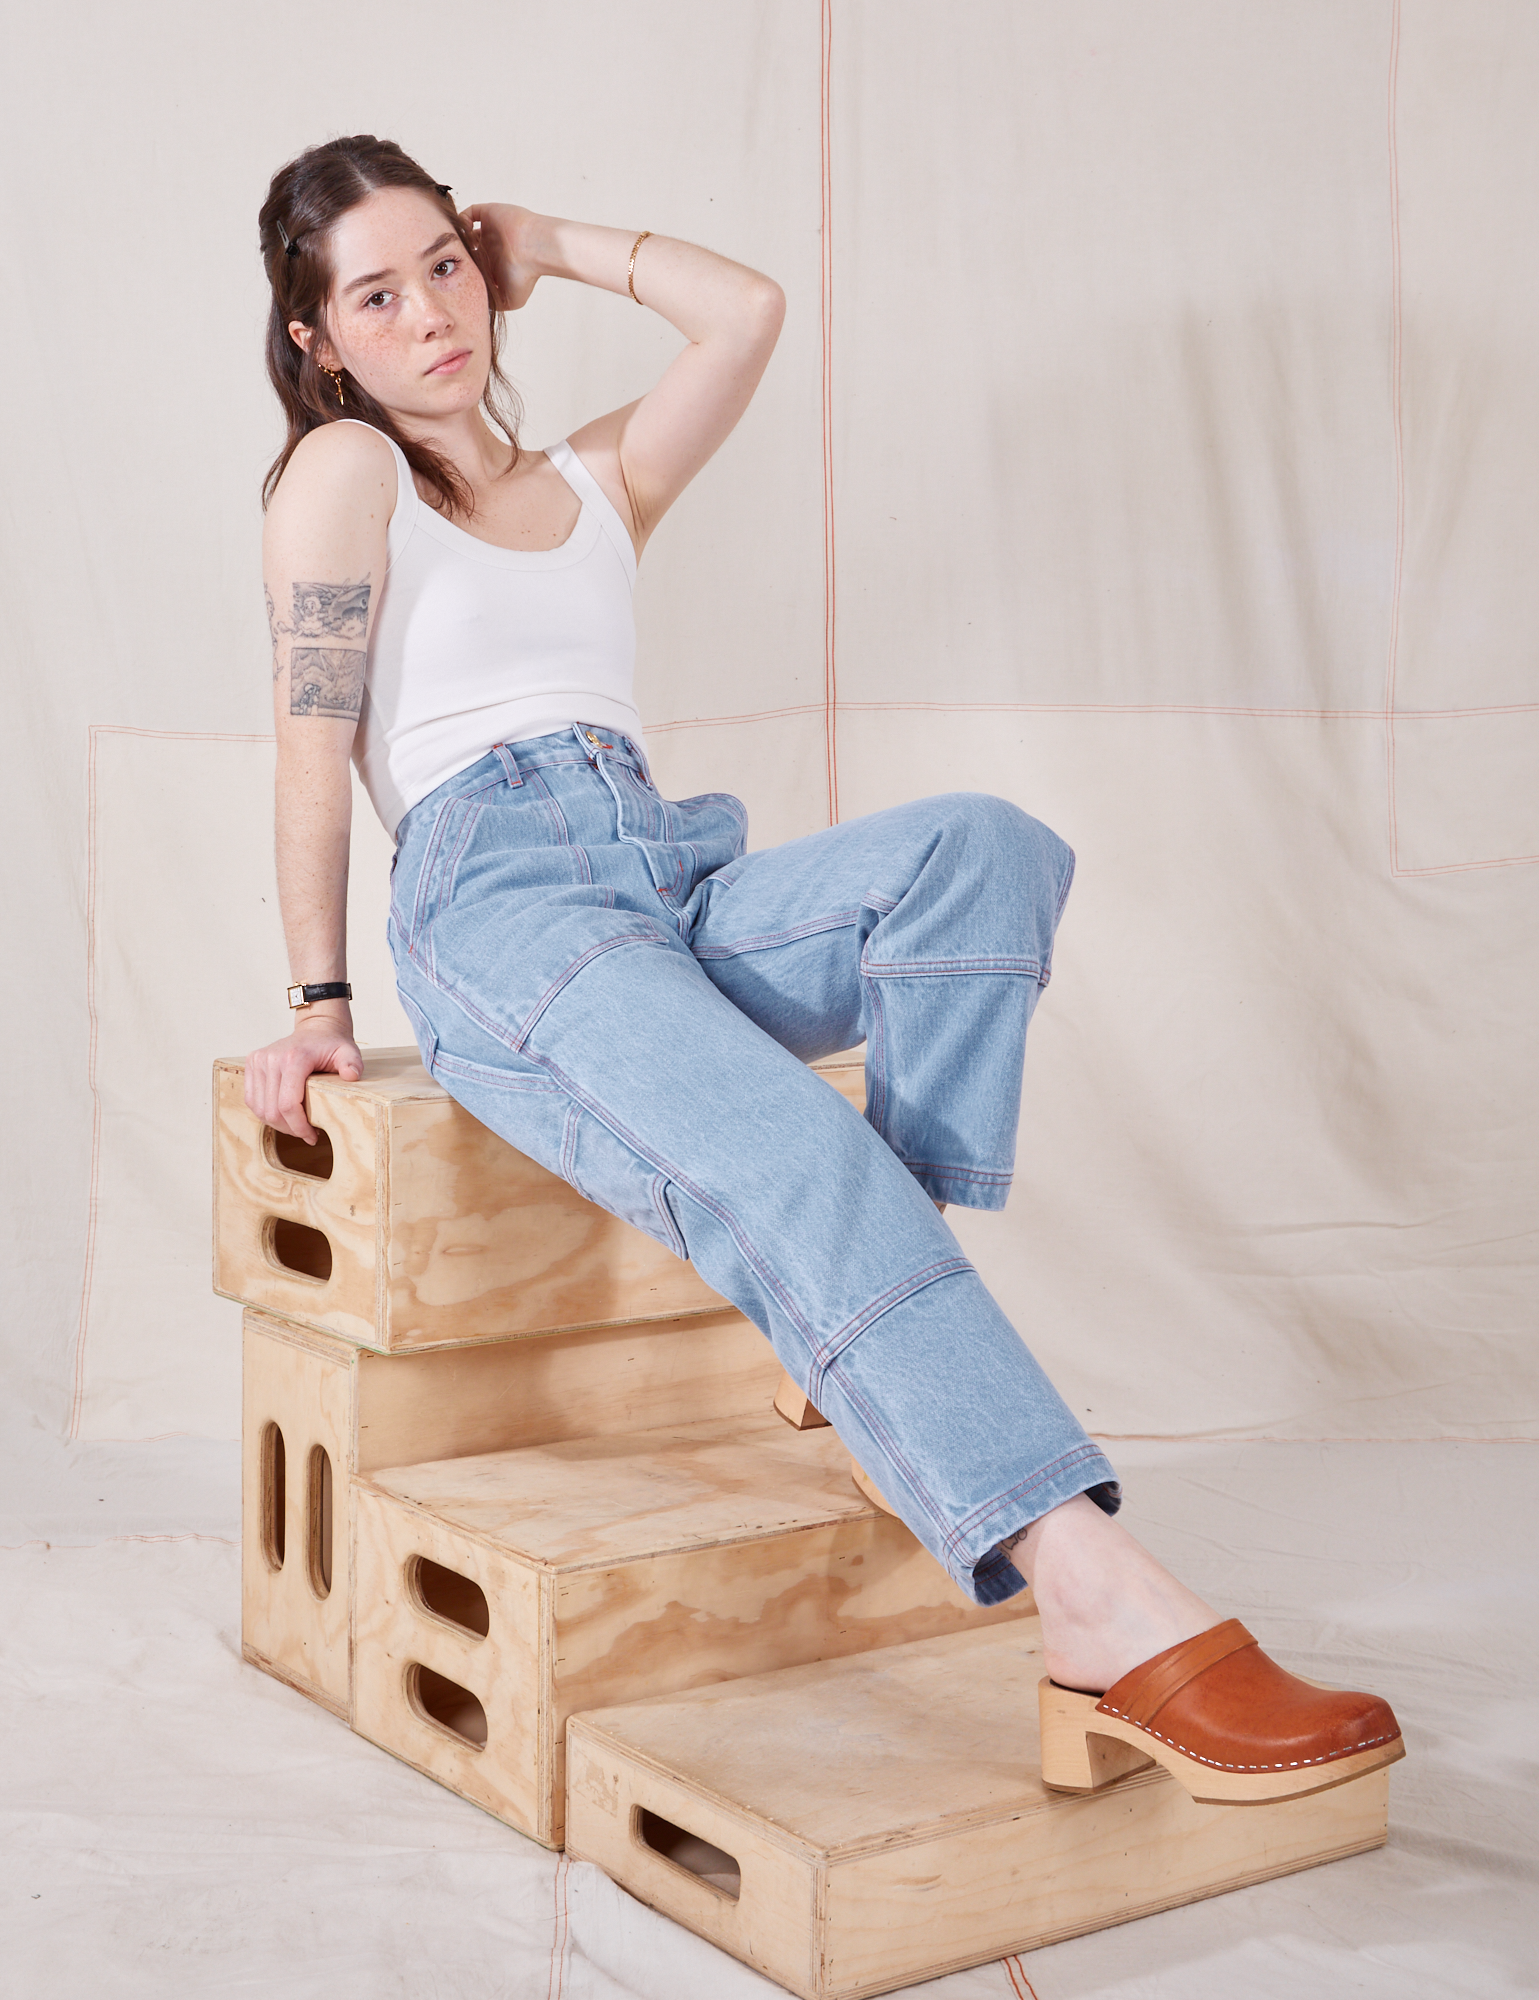 Hana is wearing Petite Carpenter Jeans in Light Wash and vintage off-white Cami